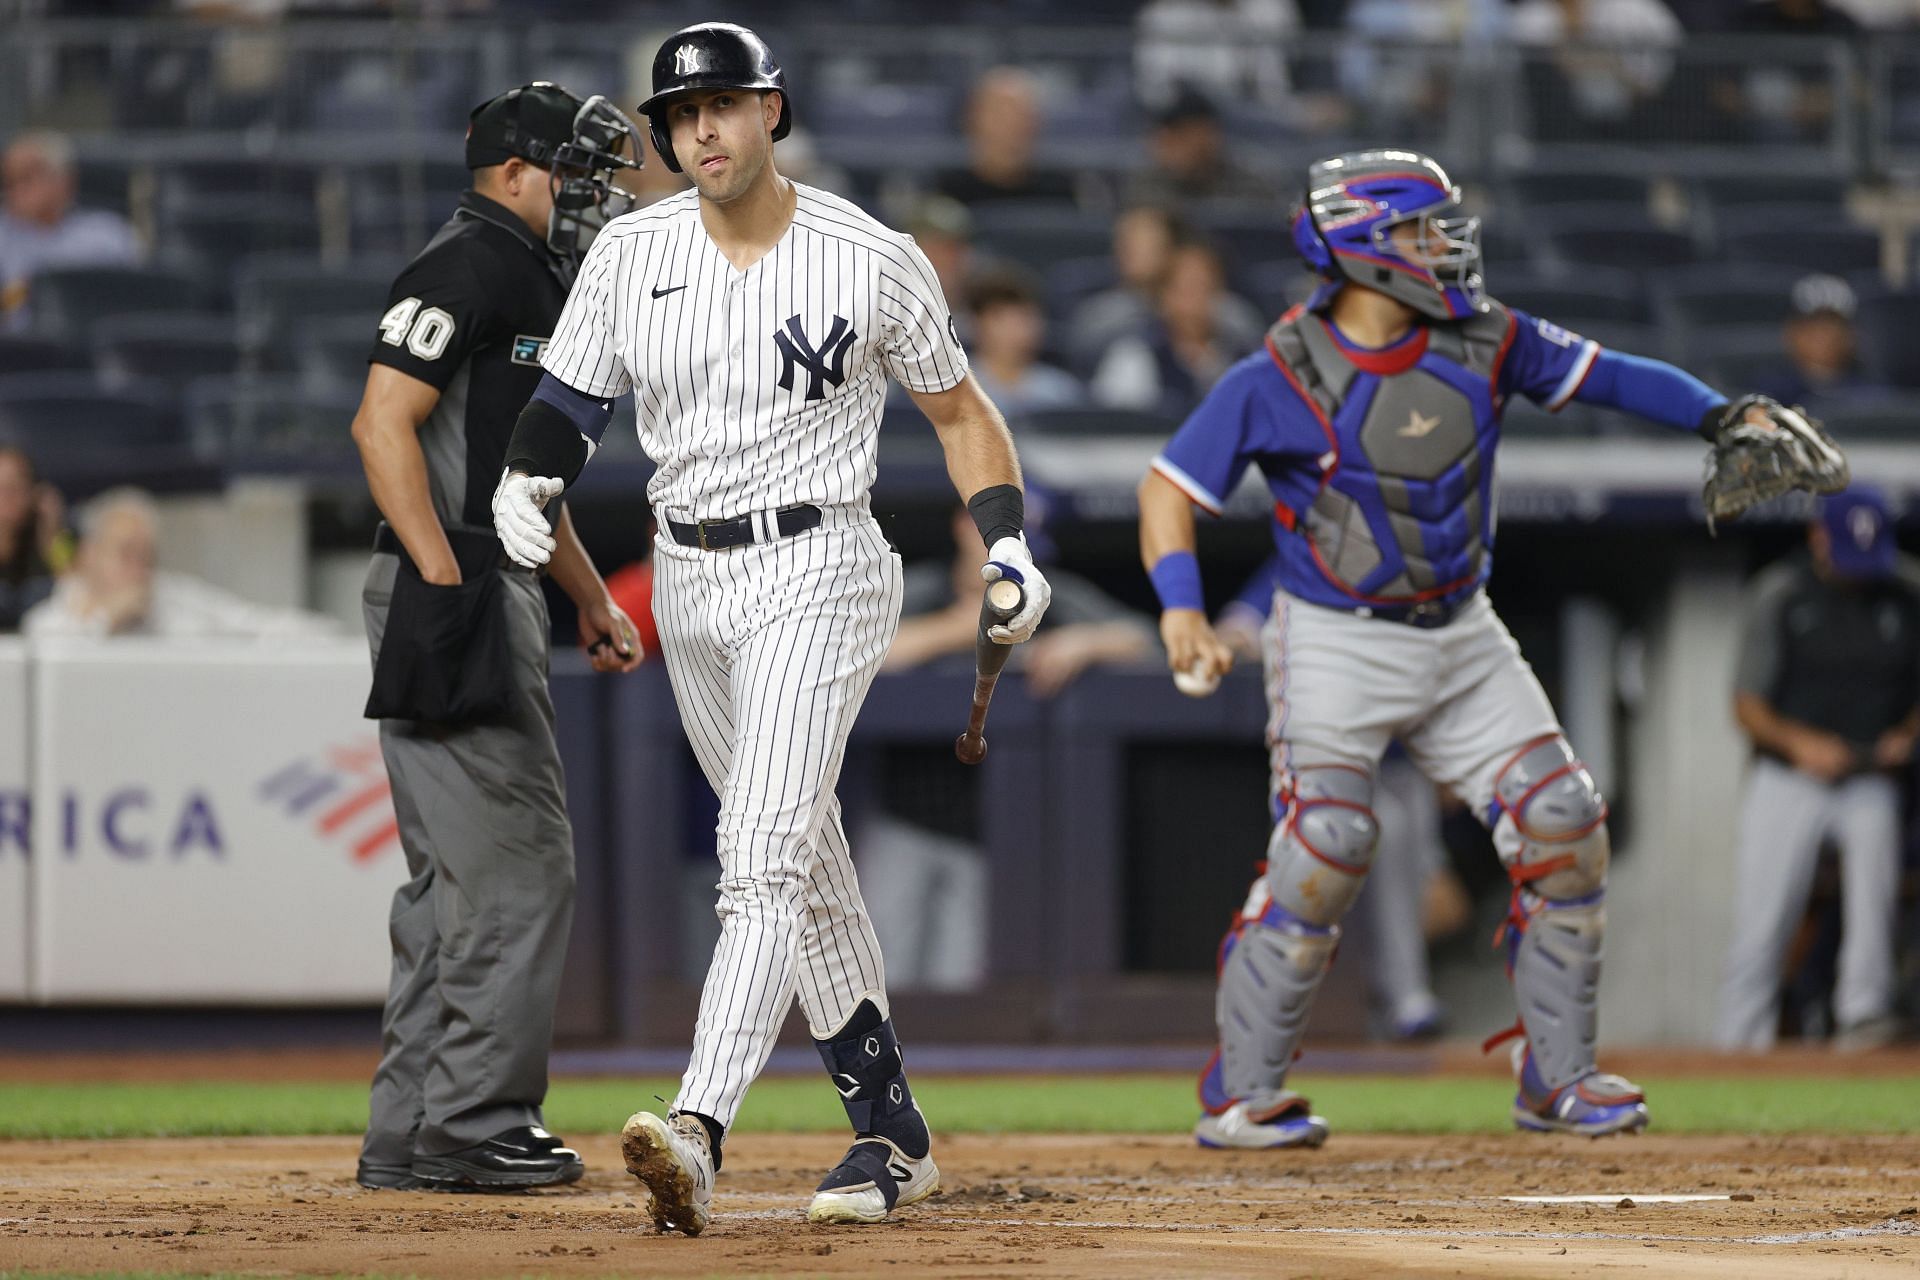 New York Yankees make Amazon Prime an exclusive viewing partner for 21 games, how this will impact MLV